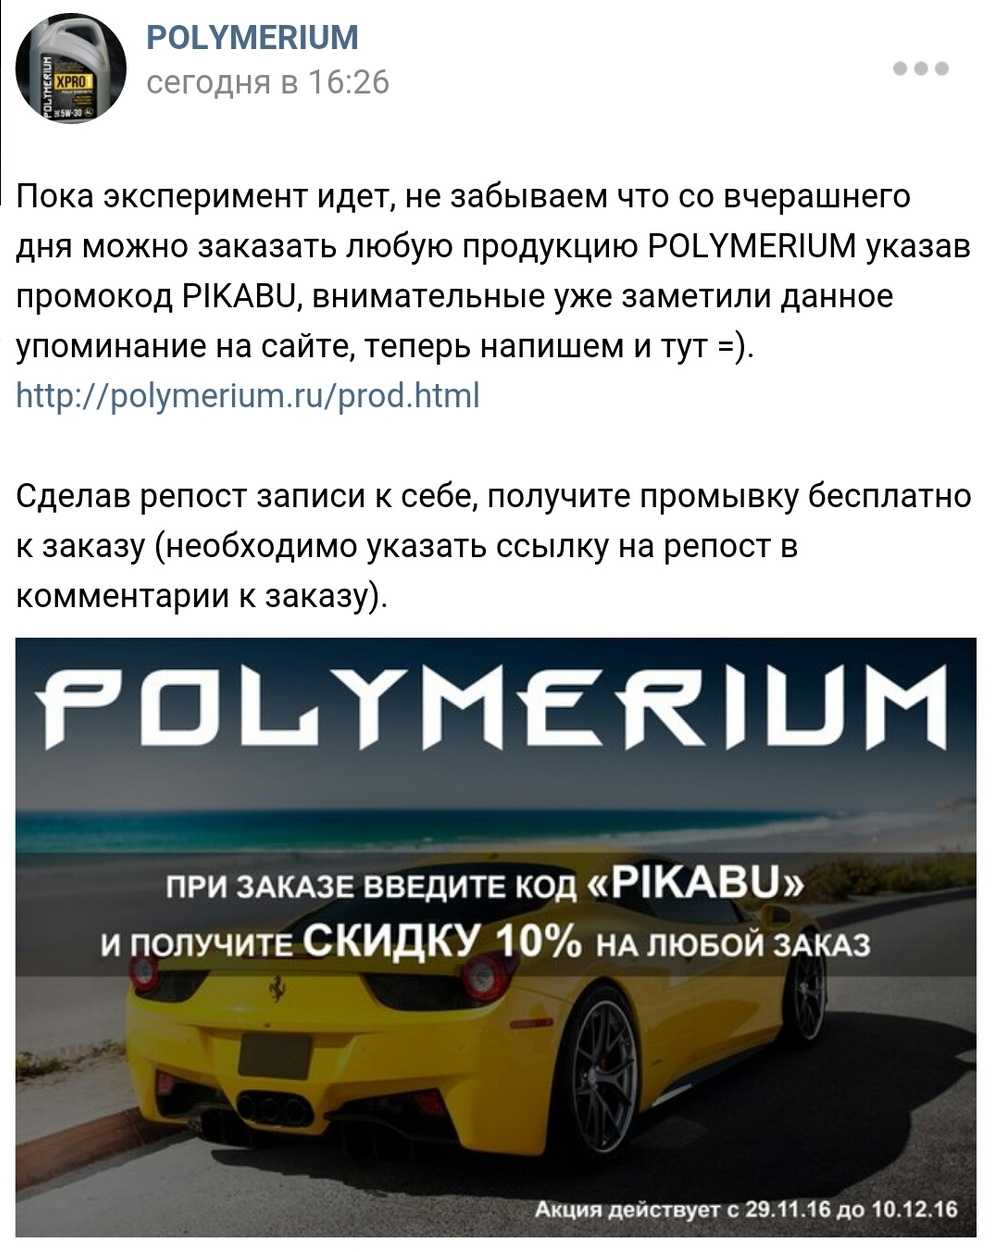 How Polymerium oil is promoted using Peekaboo - In contact with, Drive2, Screenshot